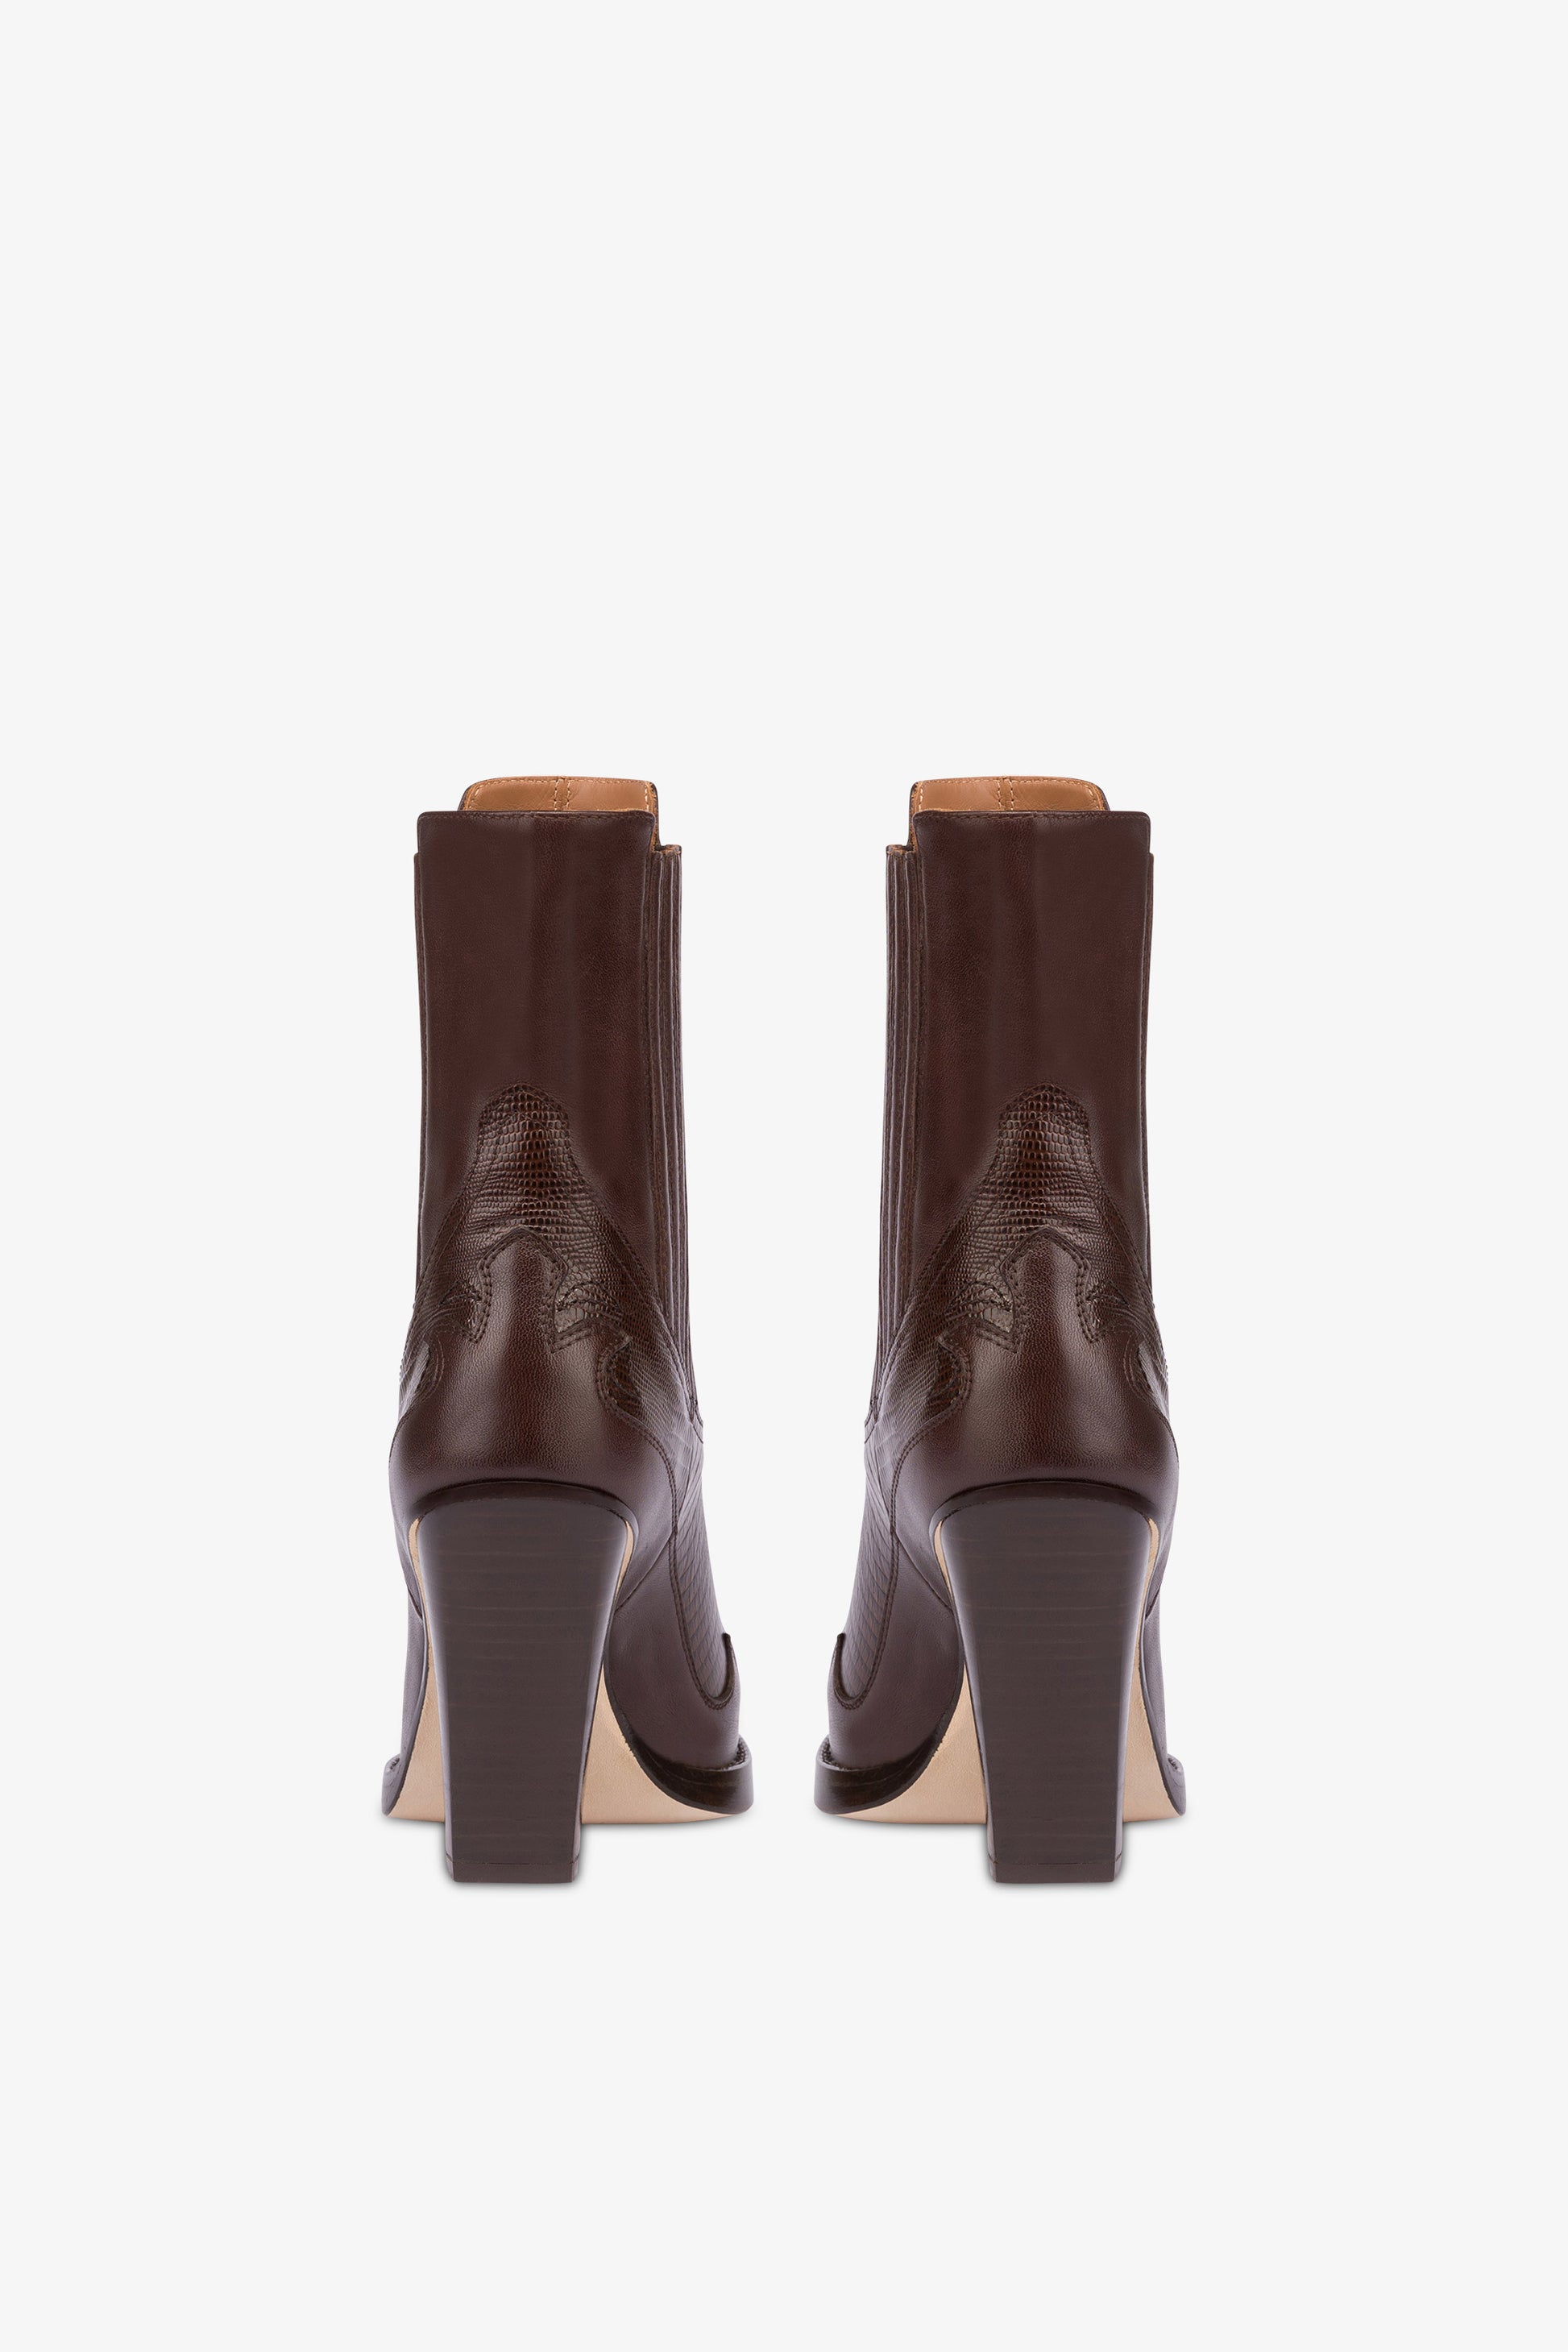 Pointed ankle boots in chocolate and mocha lizard-printed leather